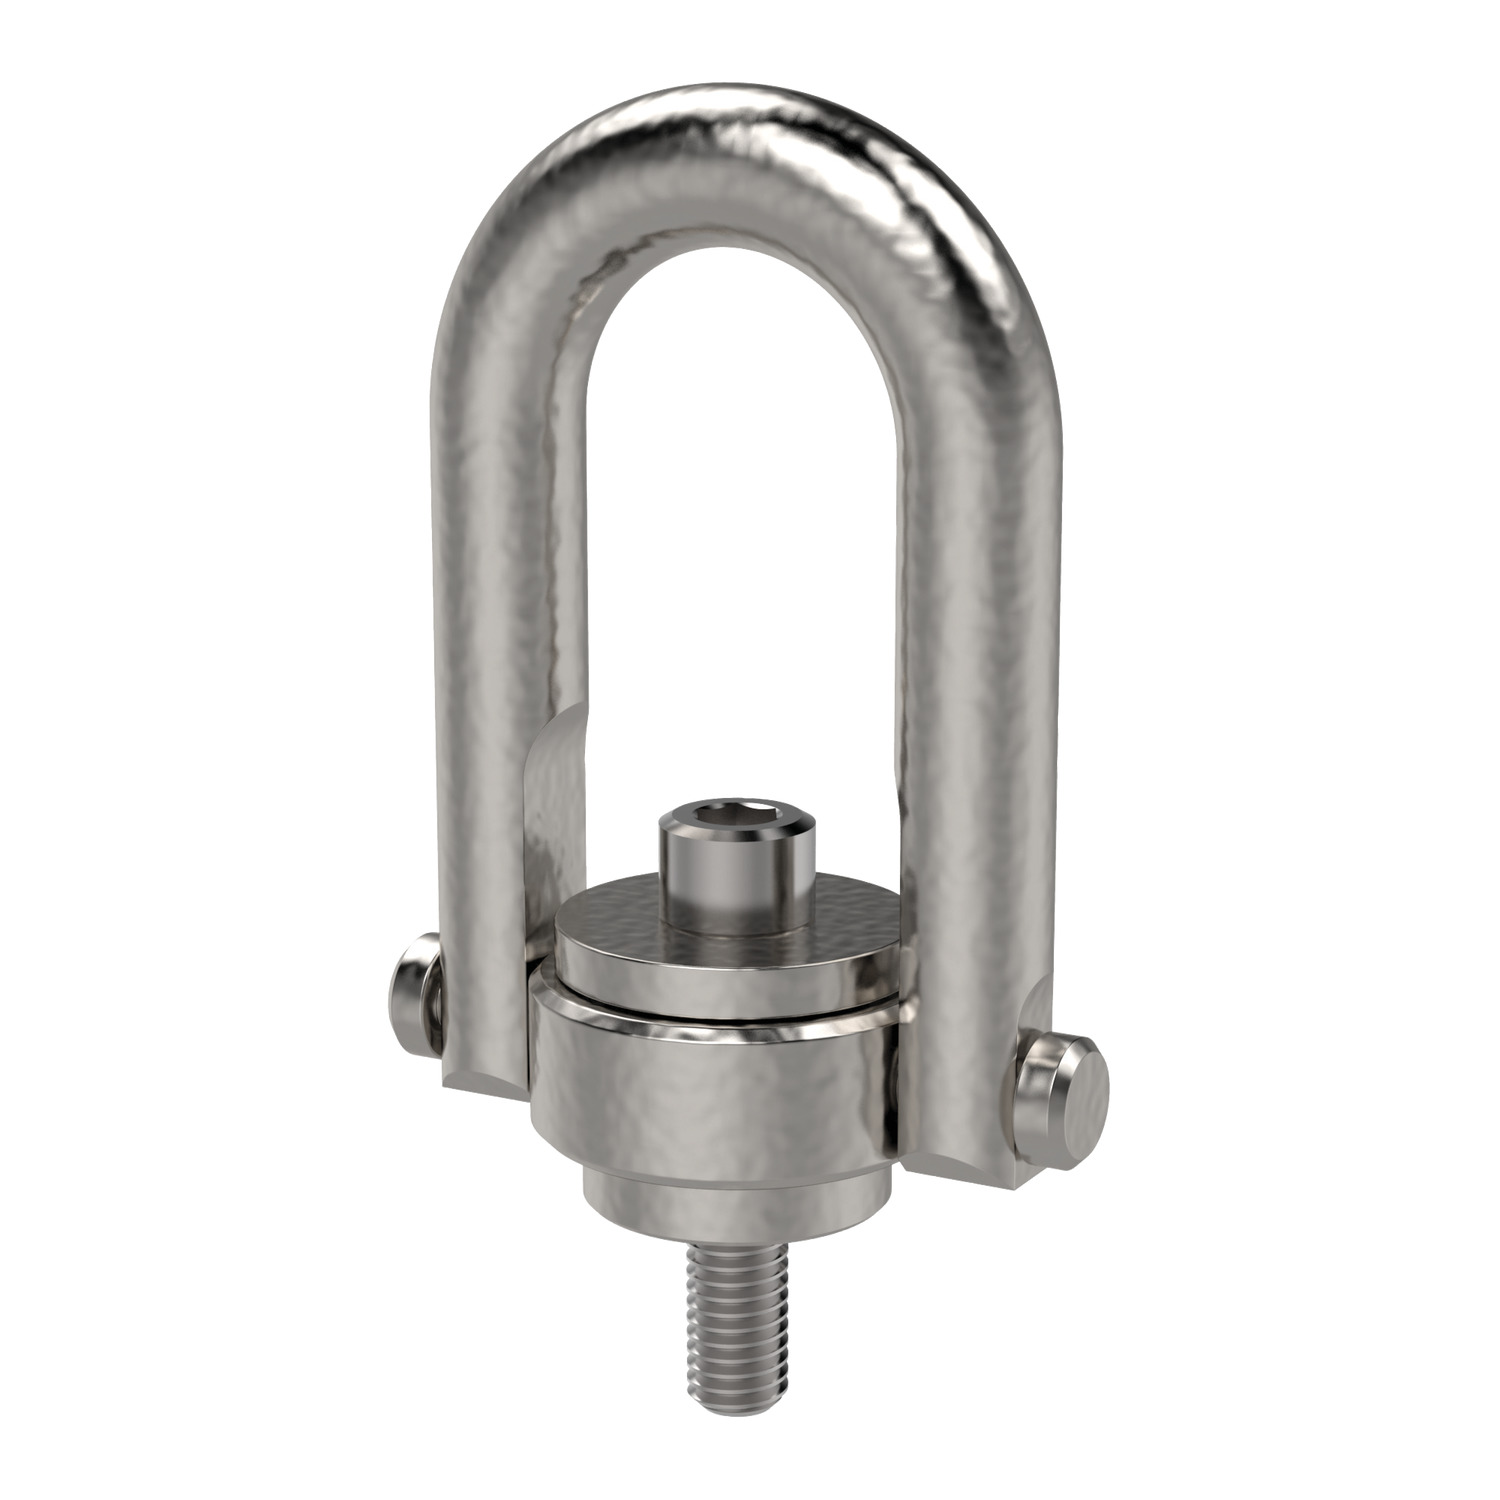 Product 63571, Lifting Points - Double Swivel - Male standard bar - metric - coarse - stainless steel / 